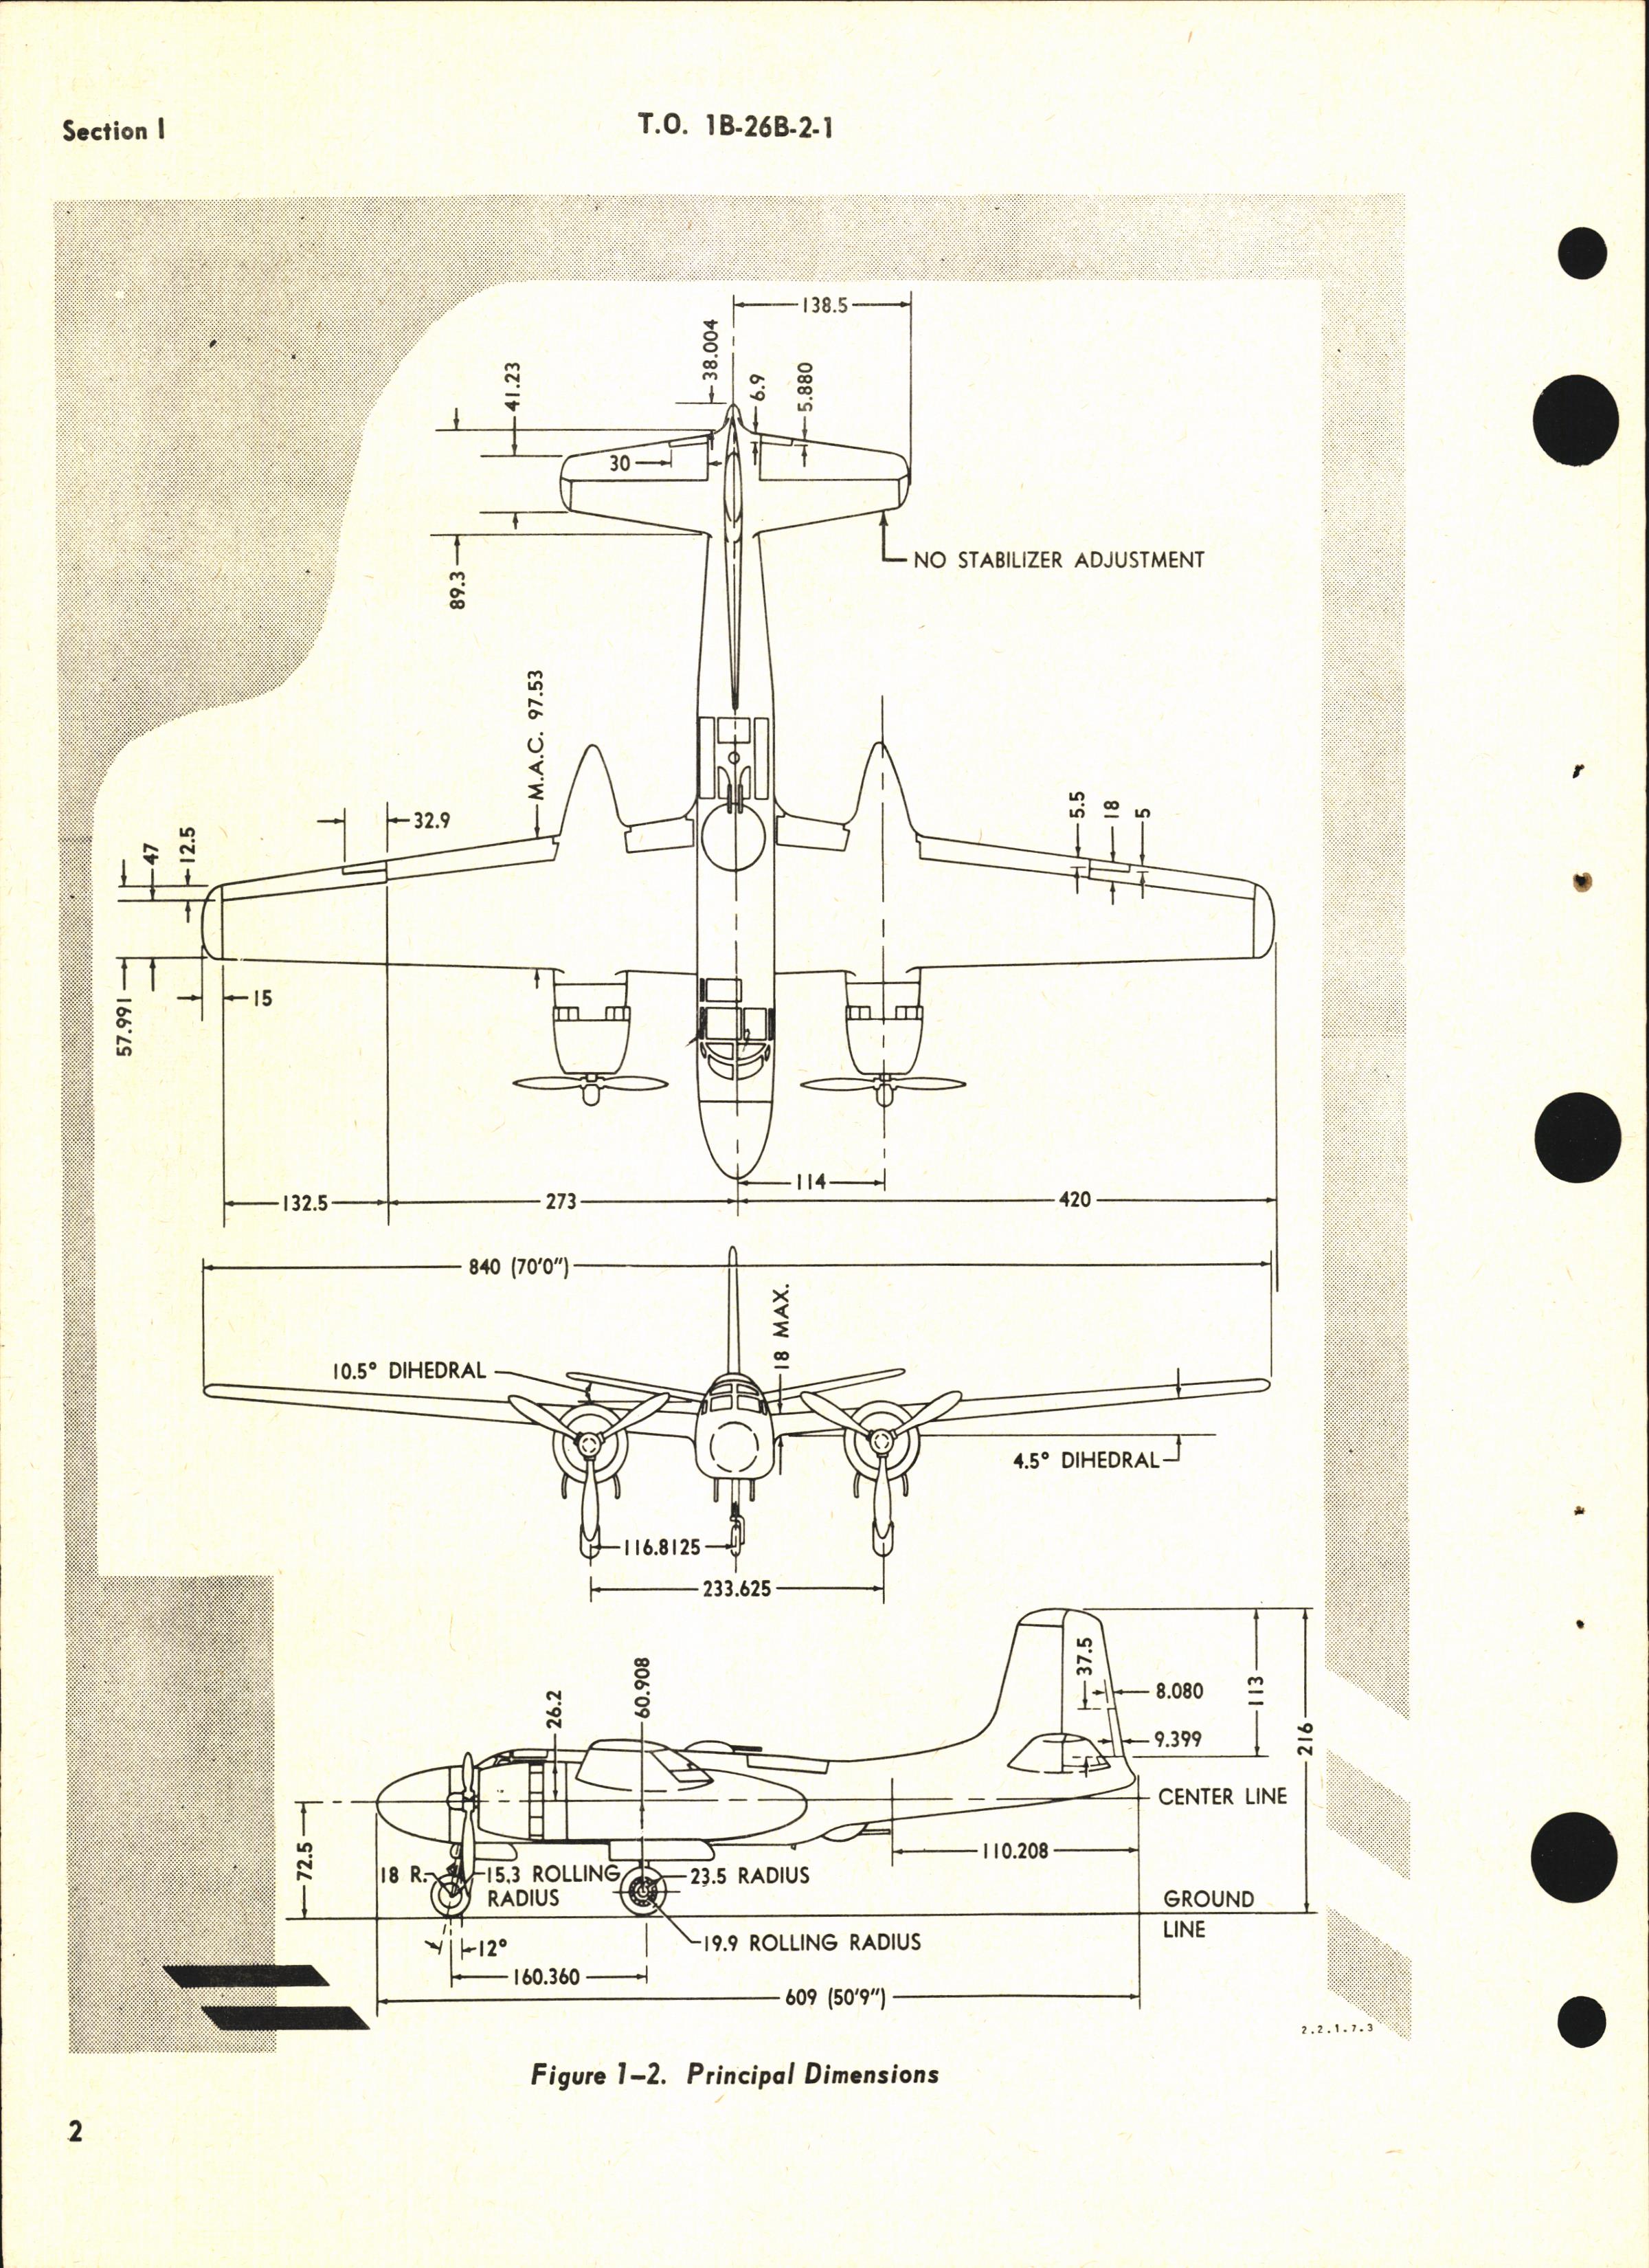 Sample page 8 from AirCorps Library document: Maintenance Instructions for B-26B, B-26C, TB-26B, TB-26C, and JD-1 - General Airplane